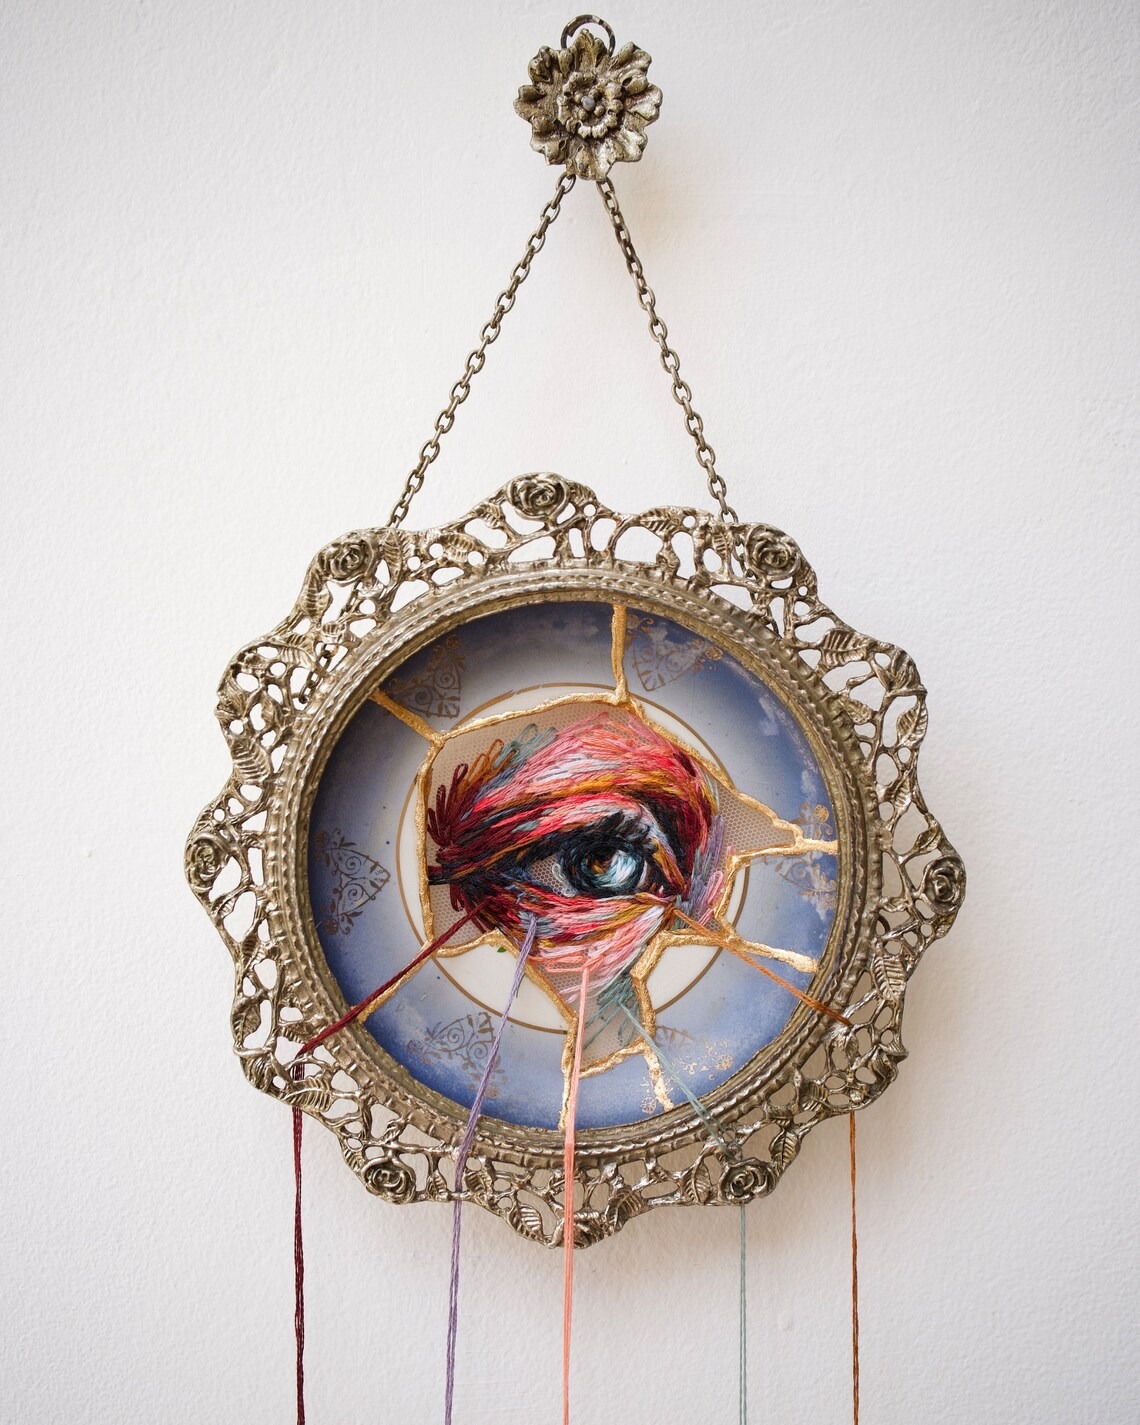 Embroidered Kintsugi, Delicate And Meaningful Mixed Media Artworks By Kathrin Marchenko (3)